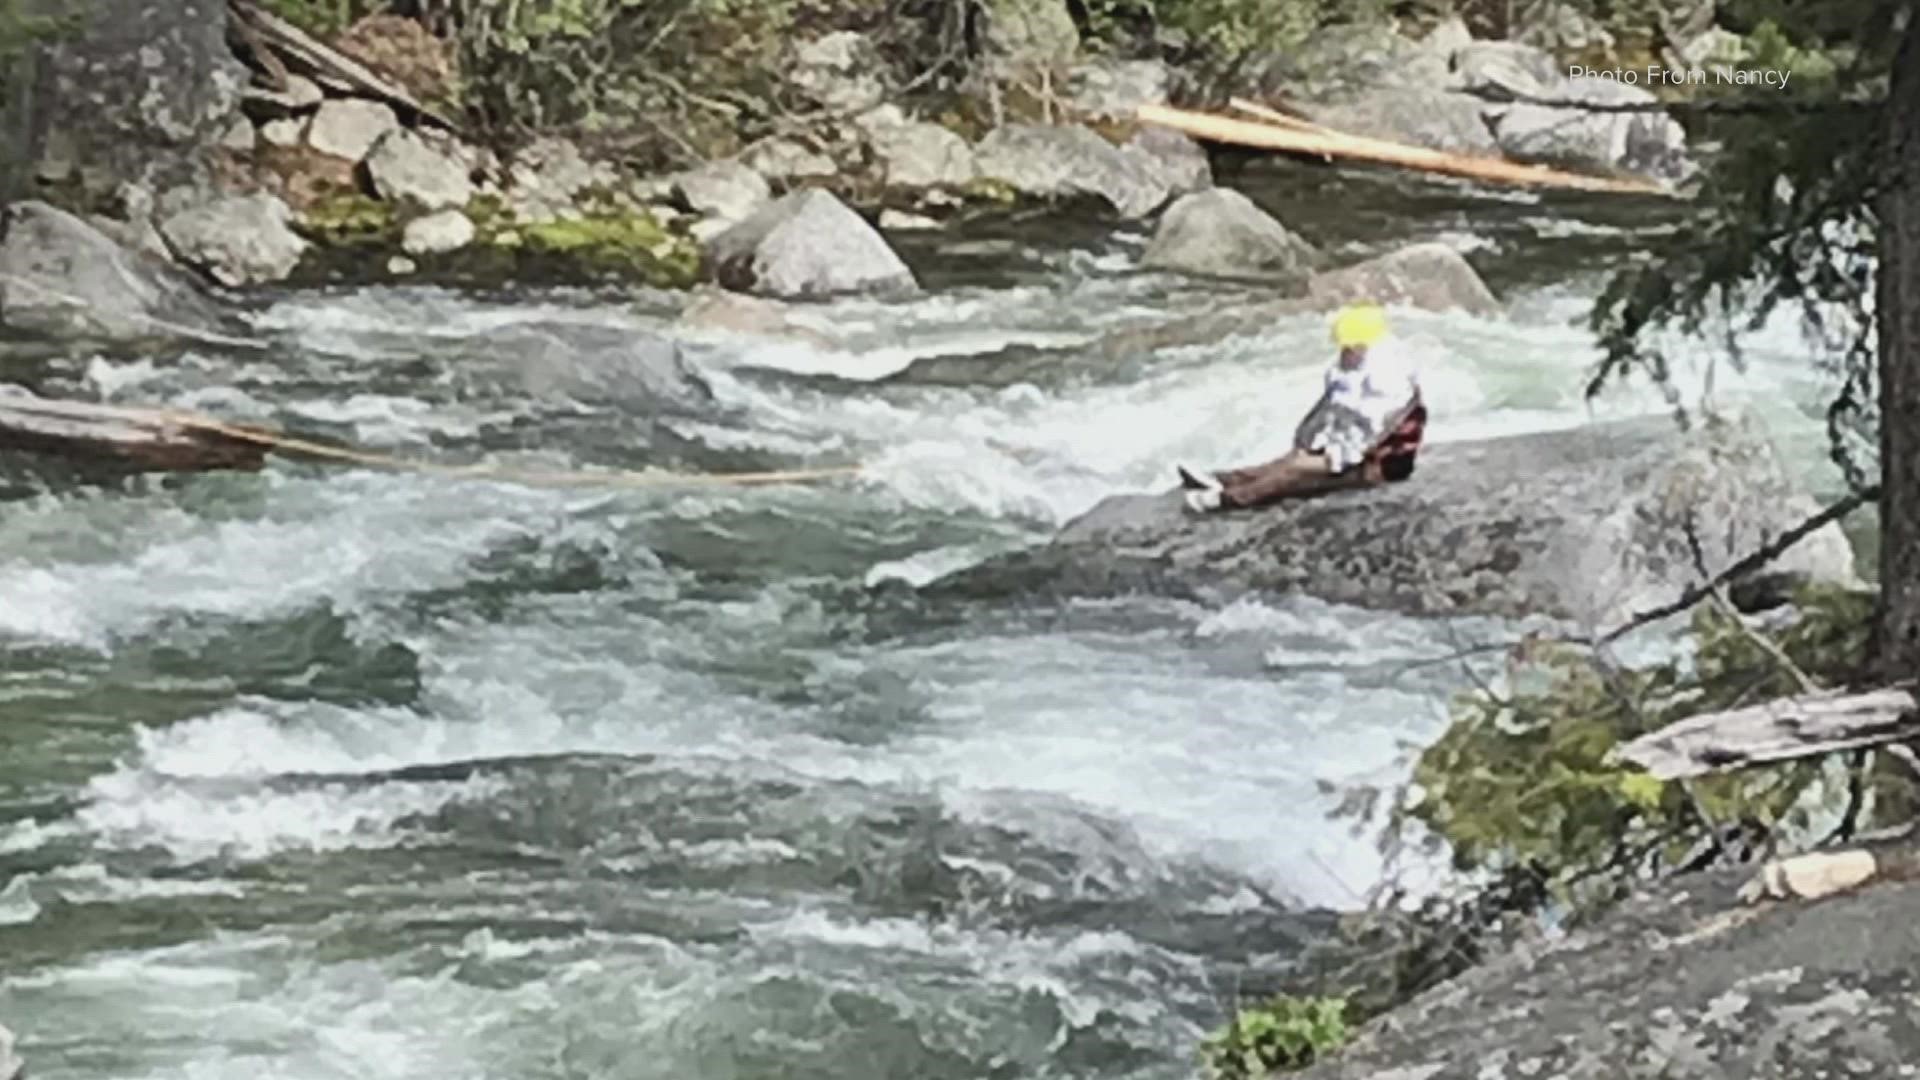 A 14-year-old from Wenatchee died after she was swept away by the Entiat River Sunday afternoon, the Chelan County Sheriff's Office said.